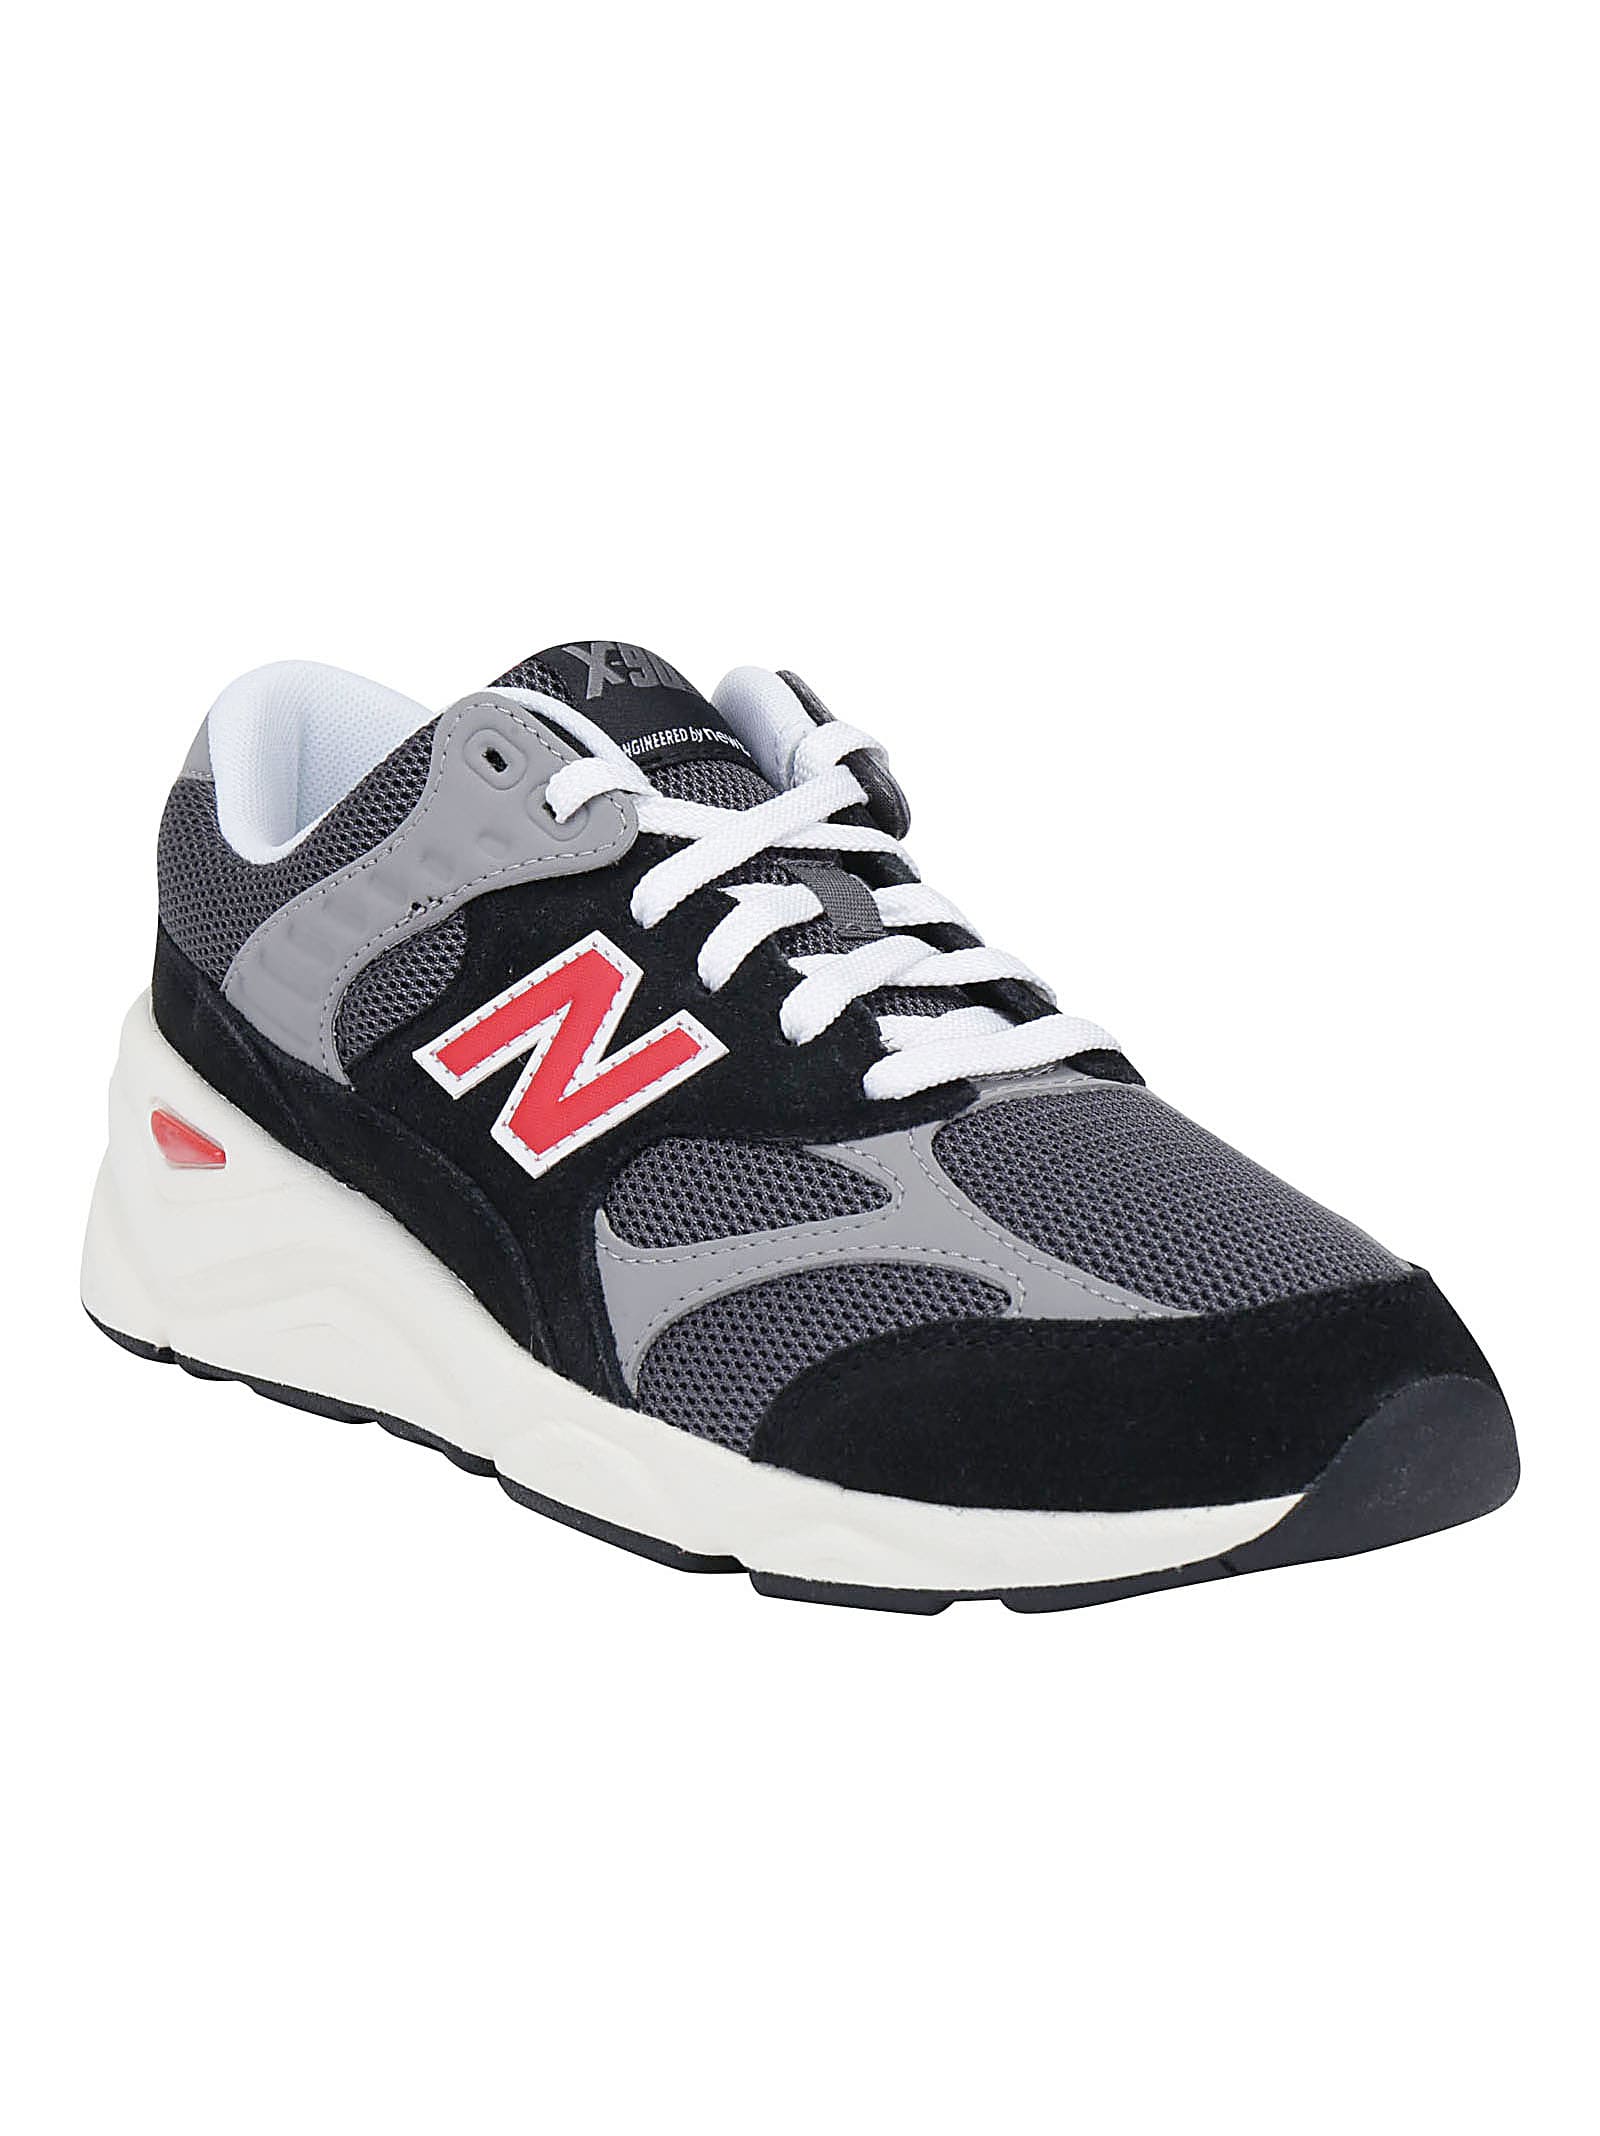 New Balance New Balance X-90 Reconstructed Sneakers - Black/grey ...